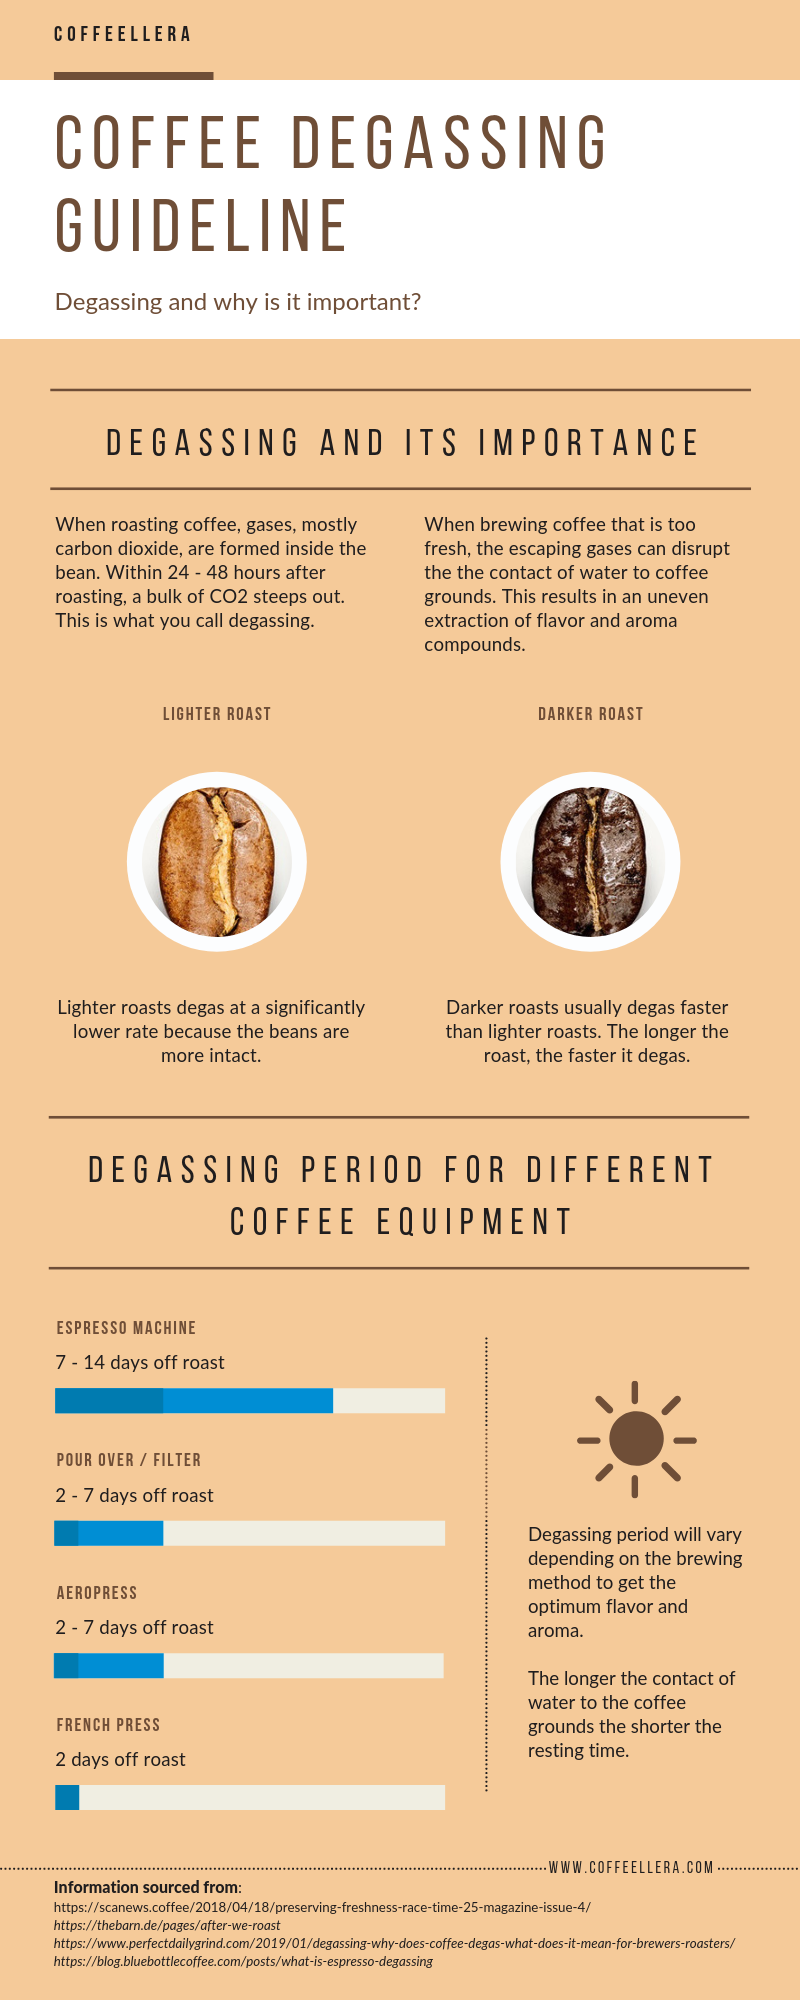 https://www.coffeellera.com/wp-content/uploads/2019/08/coffee-degassing-guideline-infographics-by-coffeellera.png